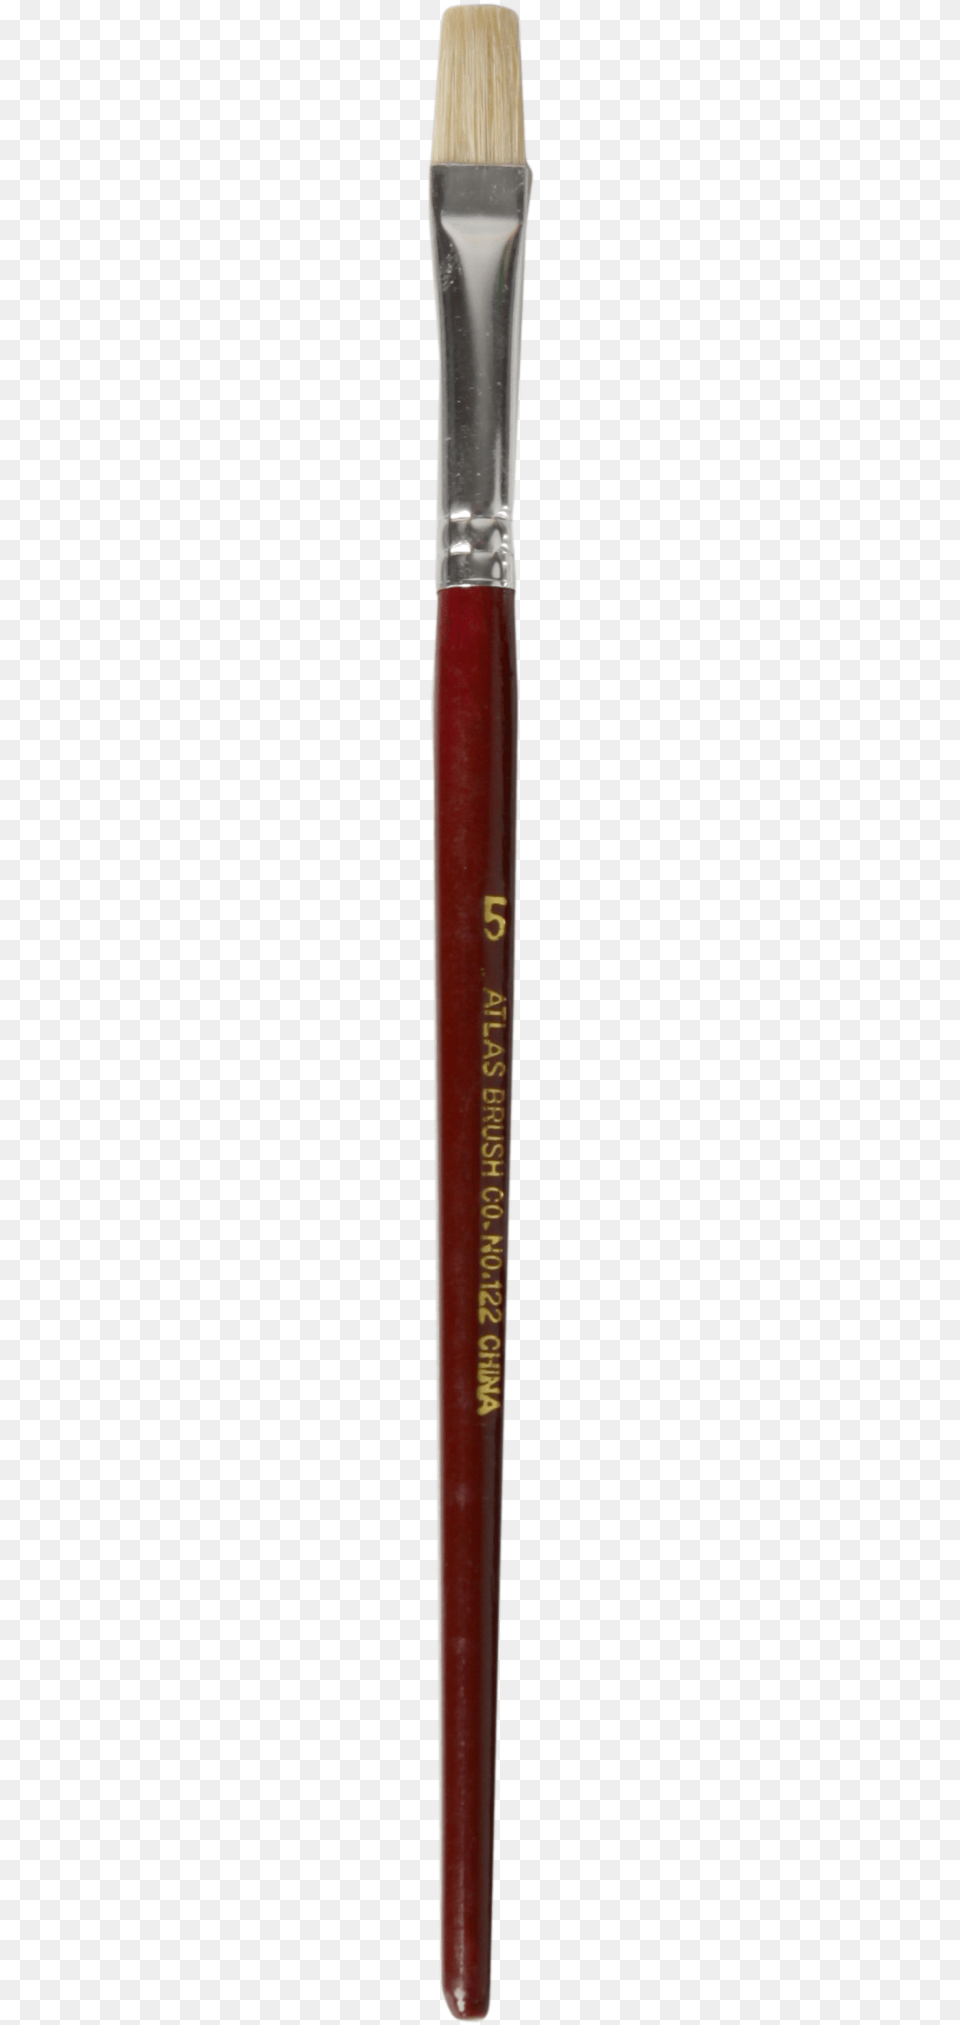 Image Is Not Available Western Concert Flute, Brush, Device, Tool Png